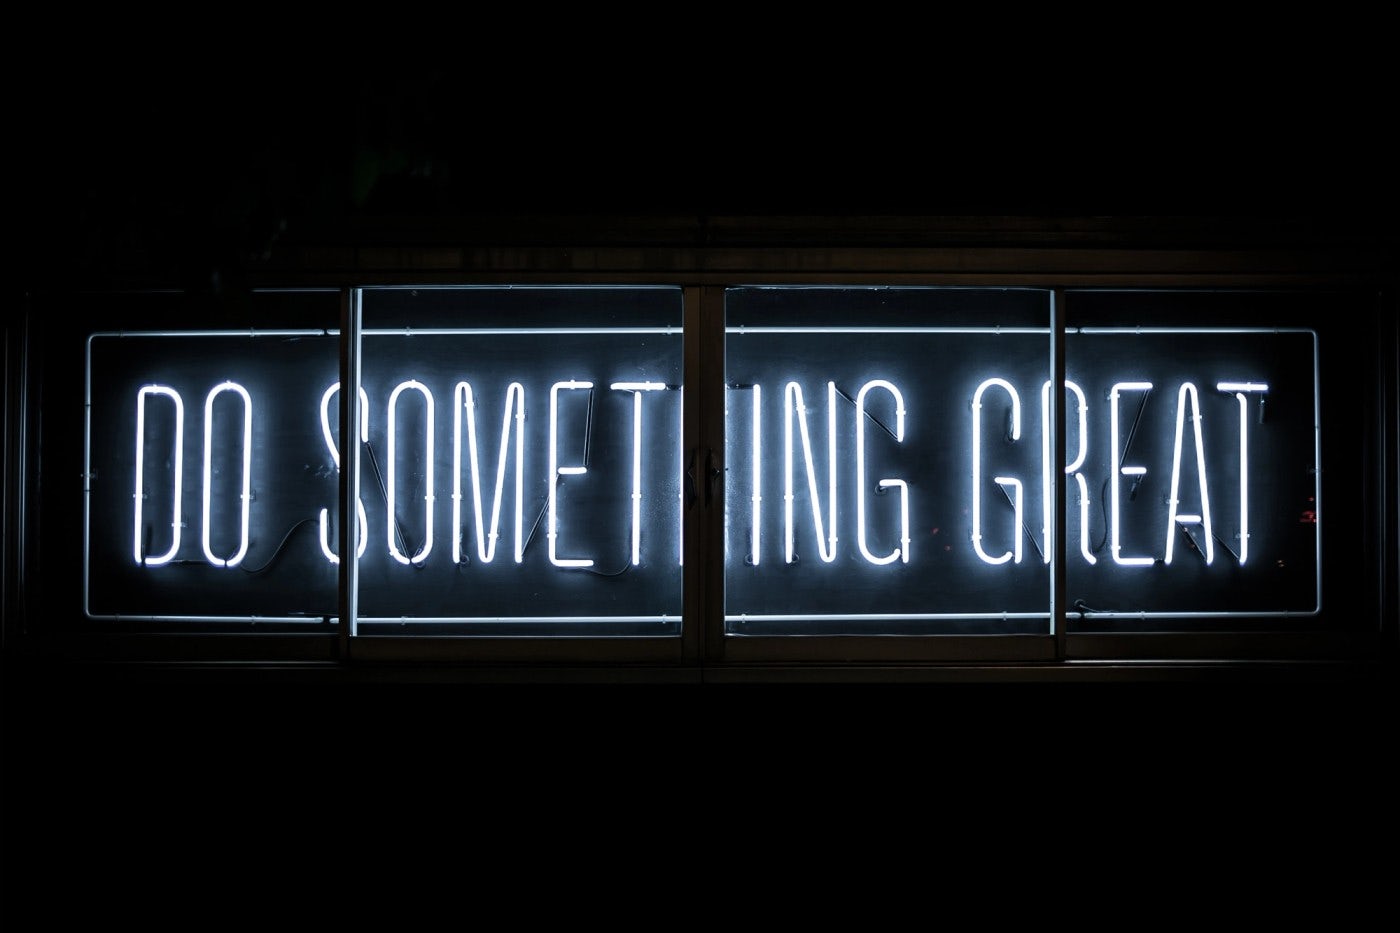 "Do something great", neon sign